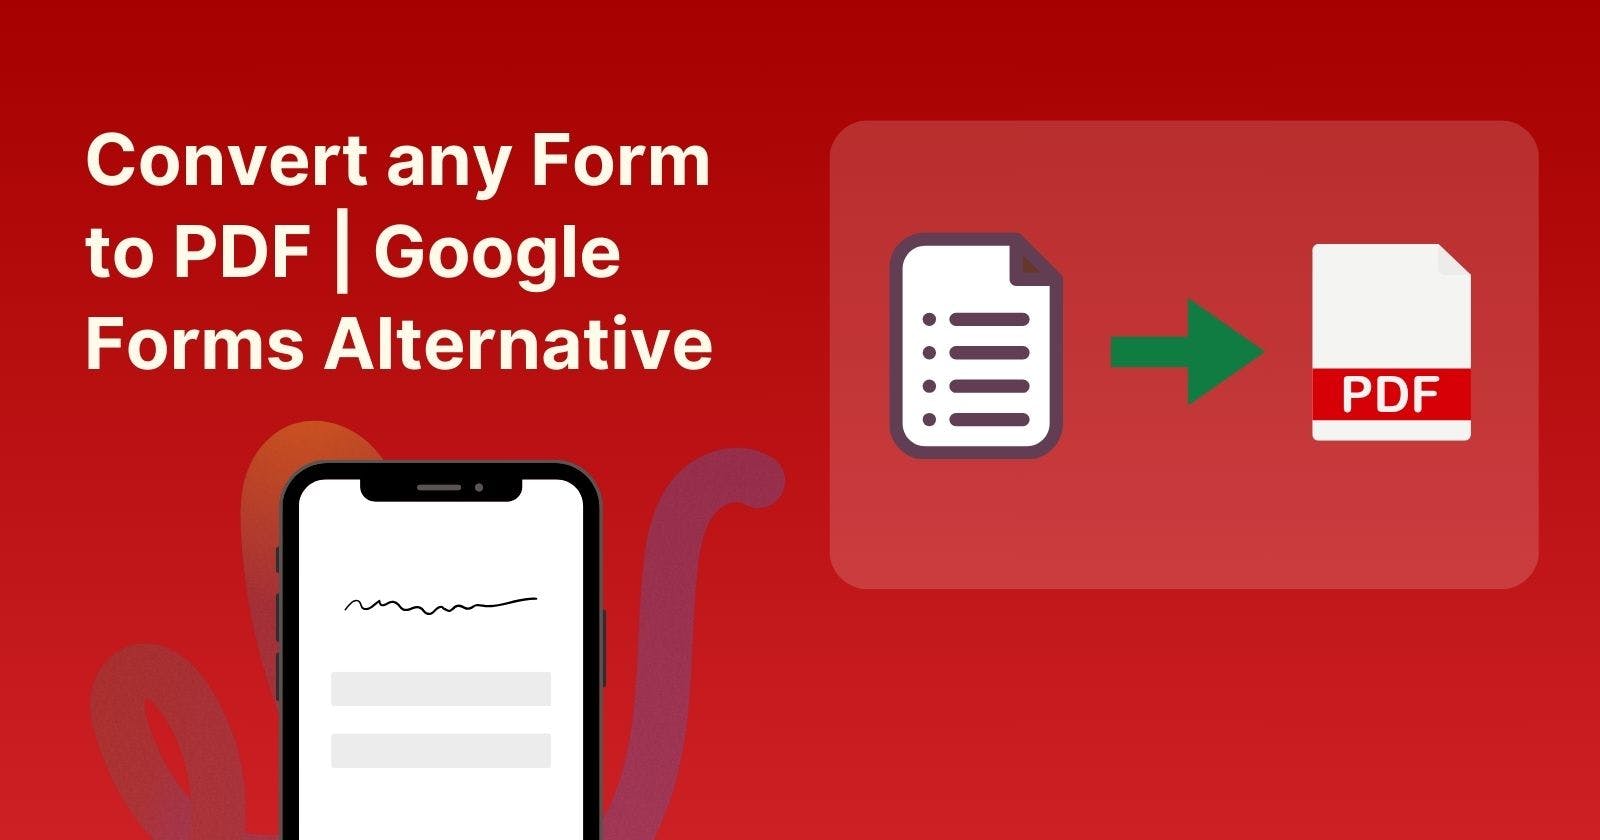 Easily Convert Any Form to a PDF | Google Form Alternative